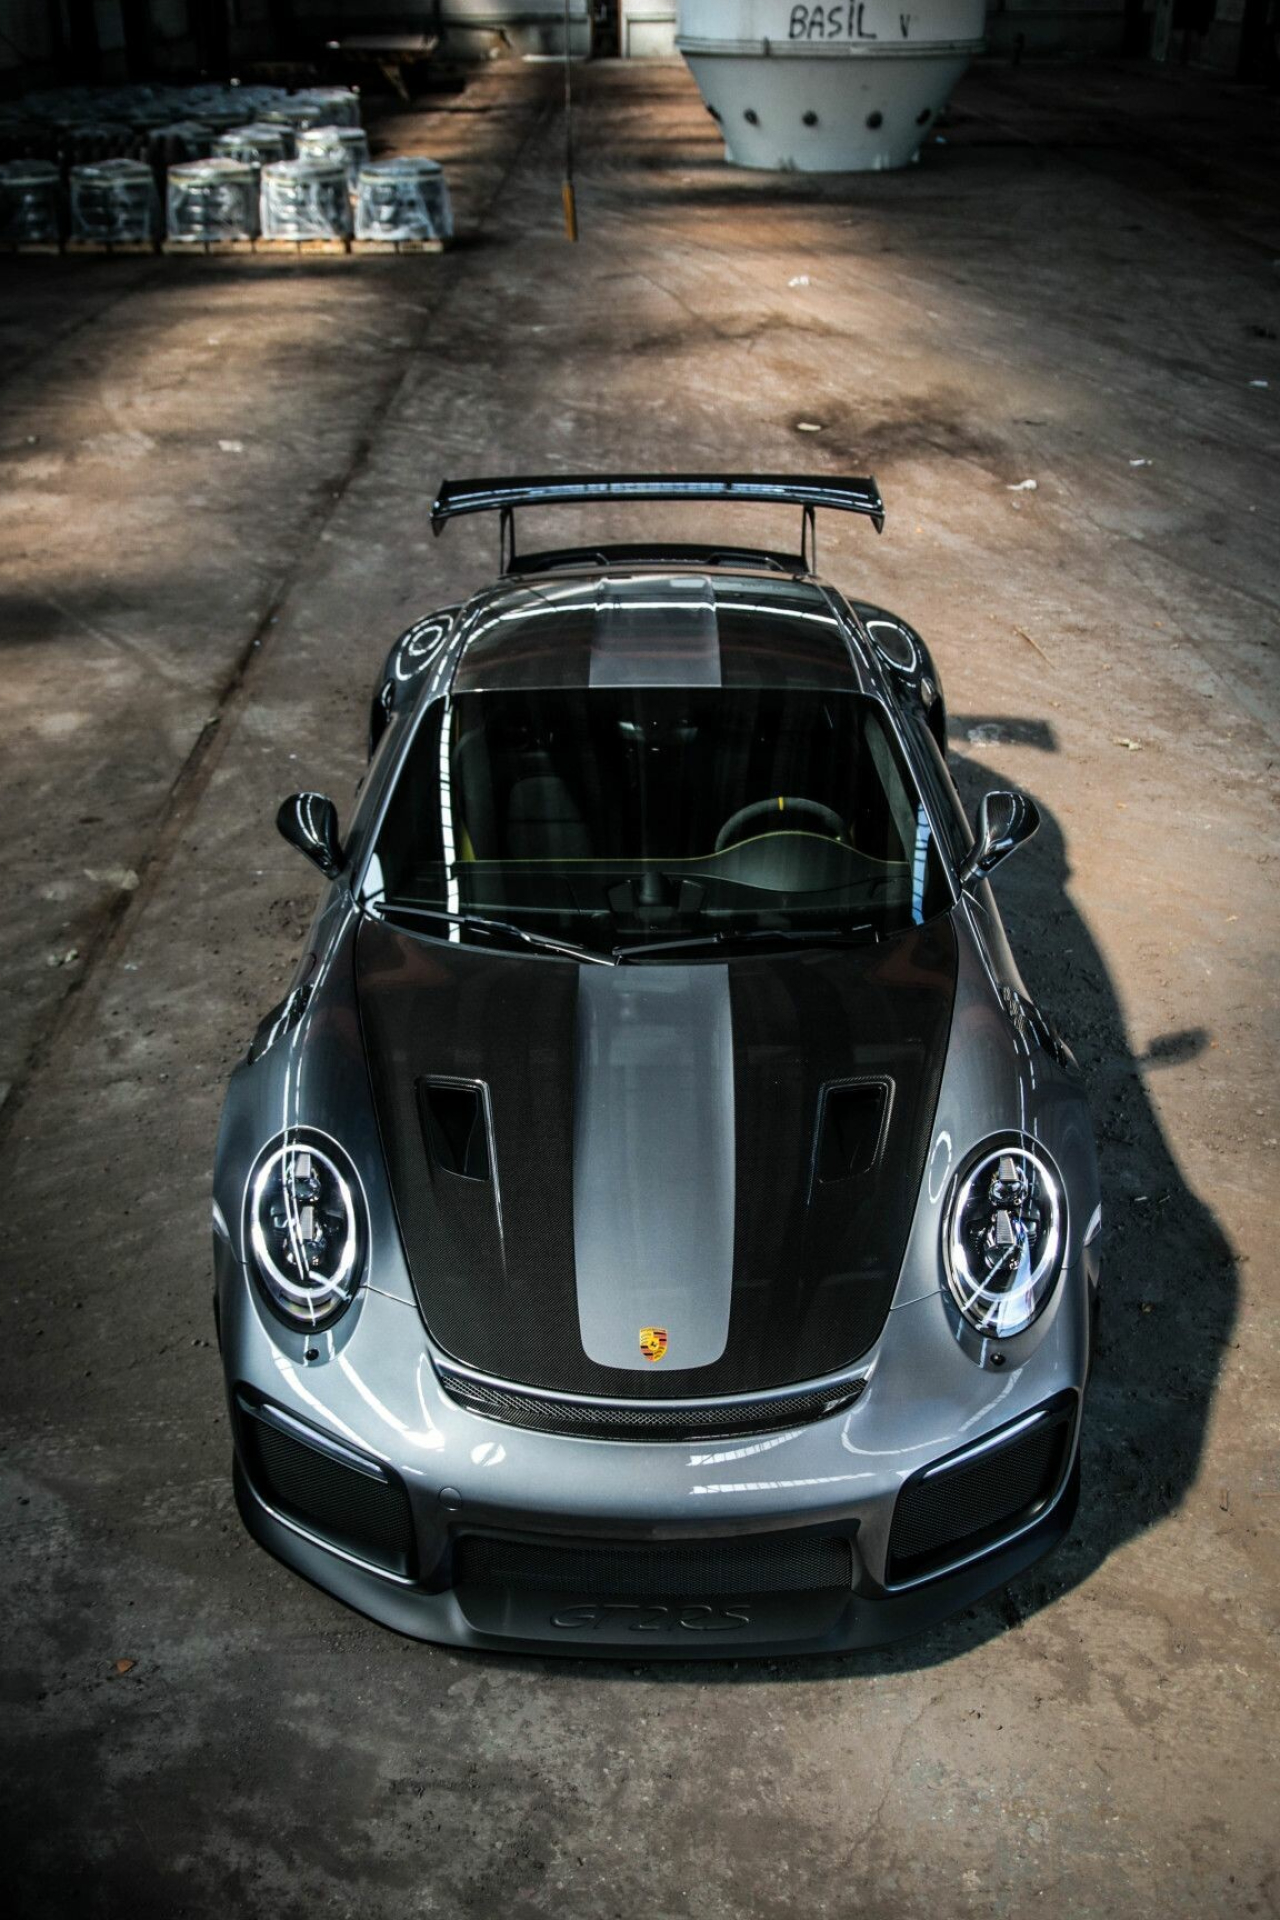 Porsche: GT2 RS, A high-performance, track-focused sports car built by the German automobile manufacturer. 1280x1920 HD Wallpaper.